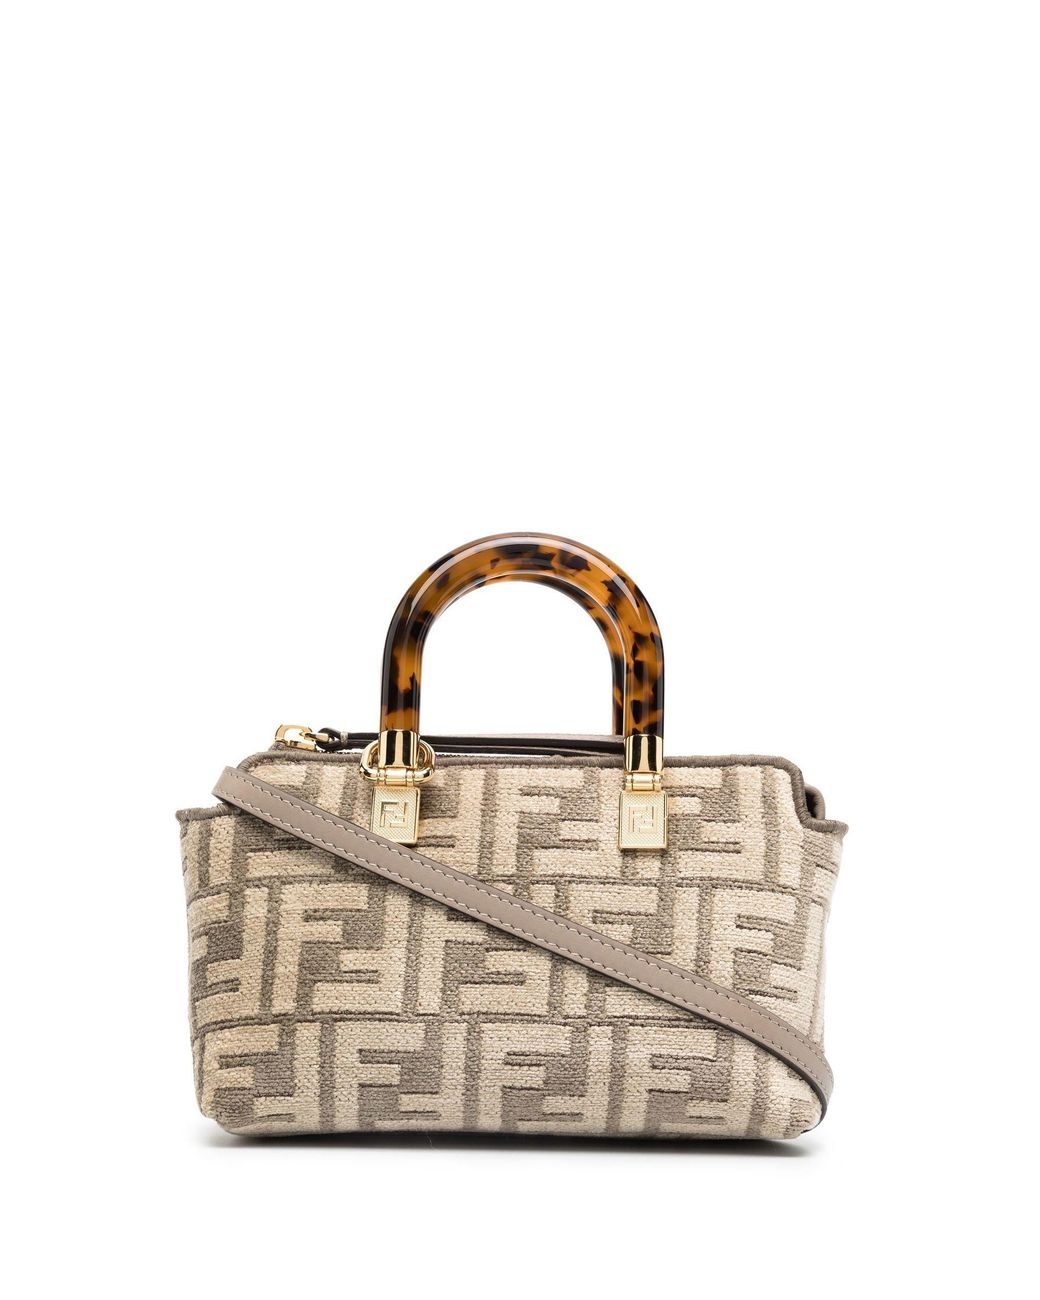 Another 'What Actually Fits' in that mini bag: Fendi Mini By The Way bag :  r/handbags